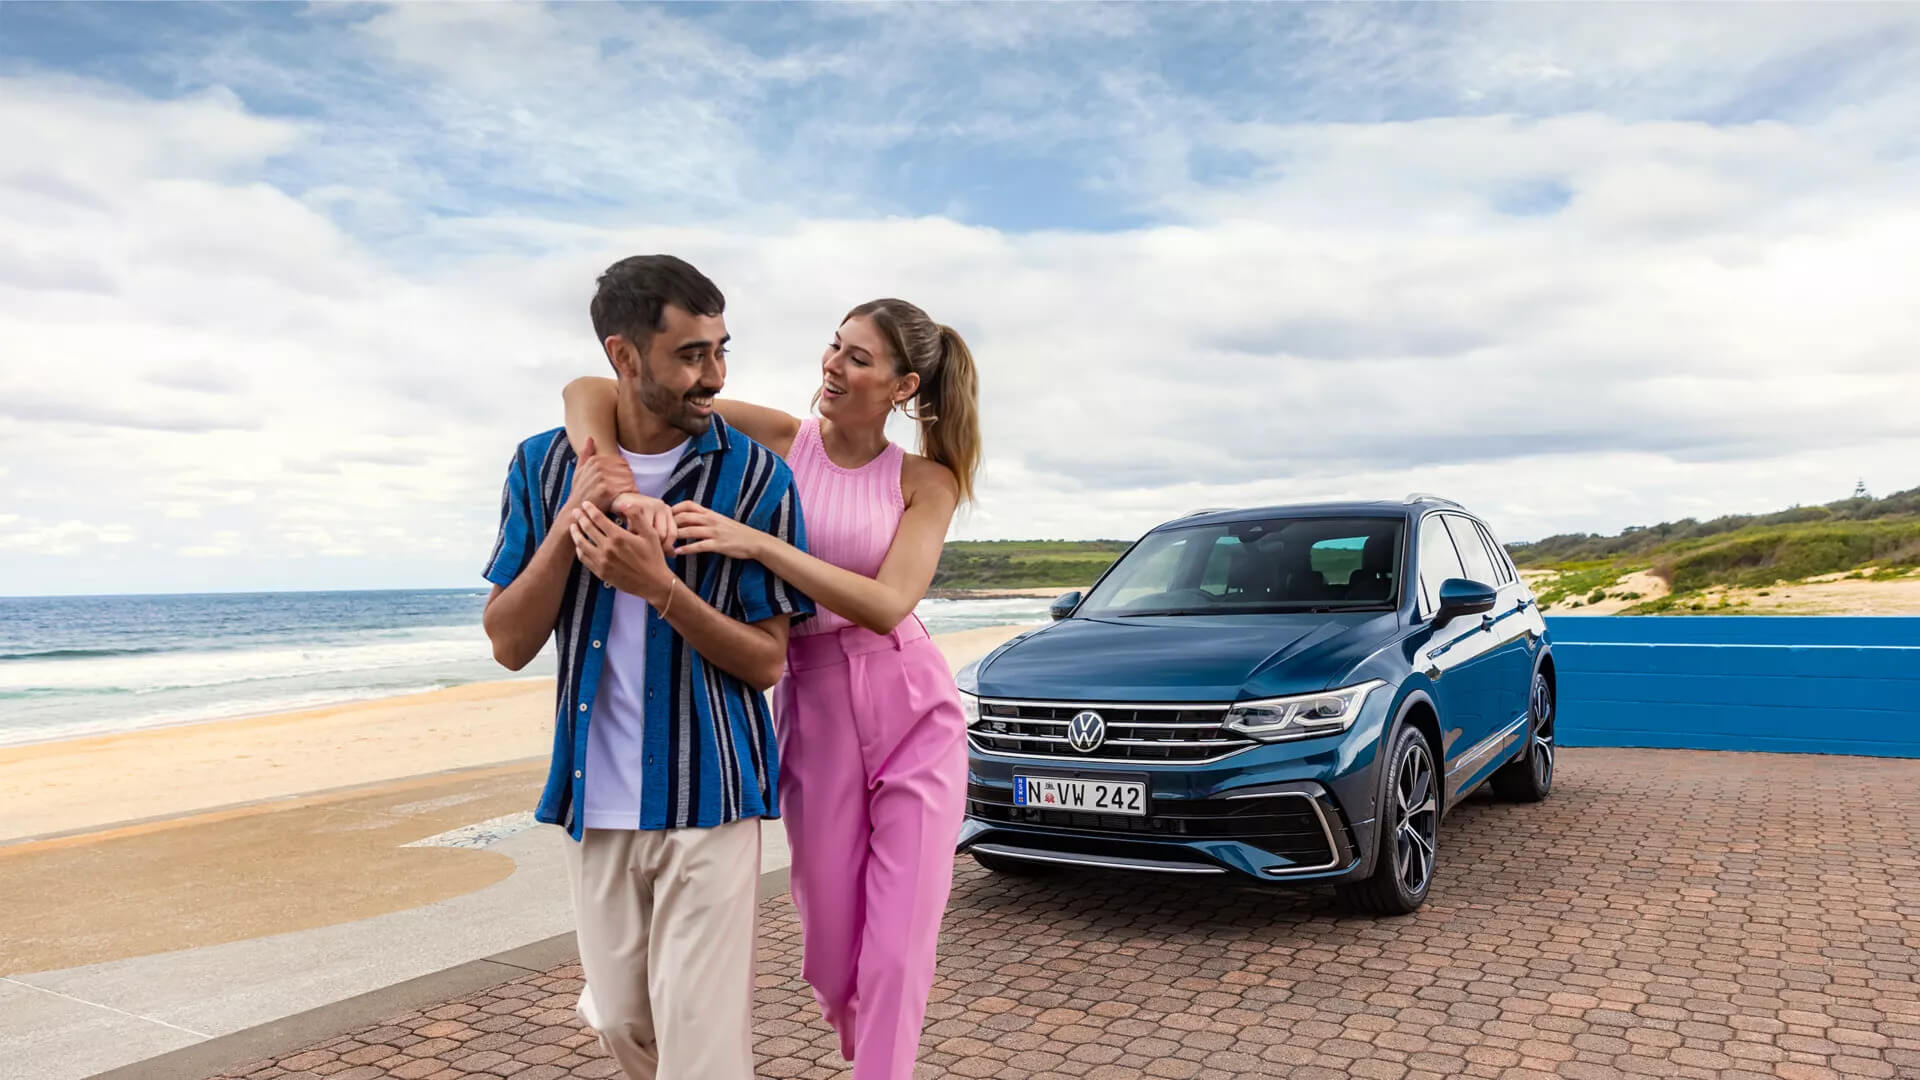 Tiguan <strong>Tiguan</strong><br>Isn’t it time you <strong>SUVW?</strong>